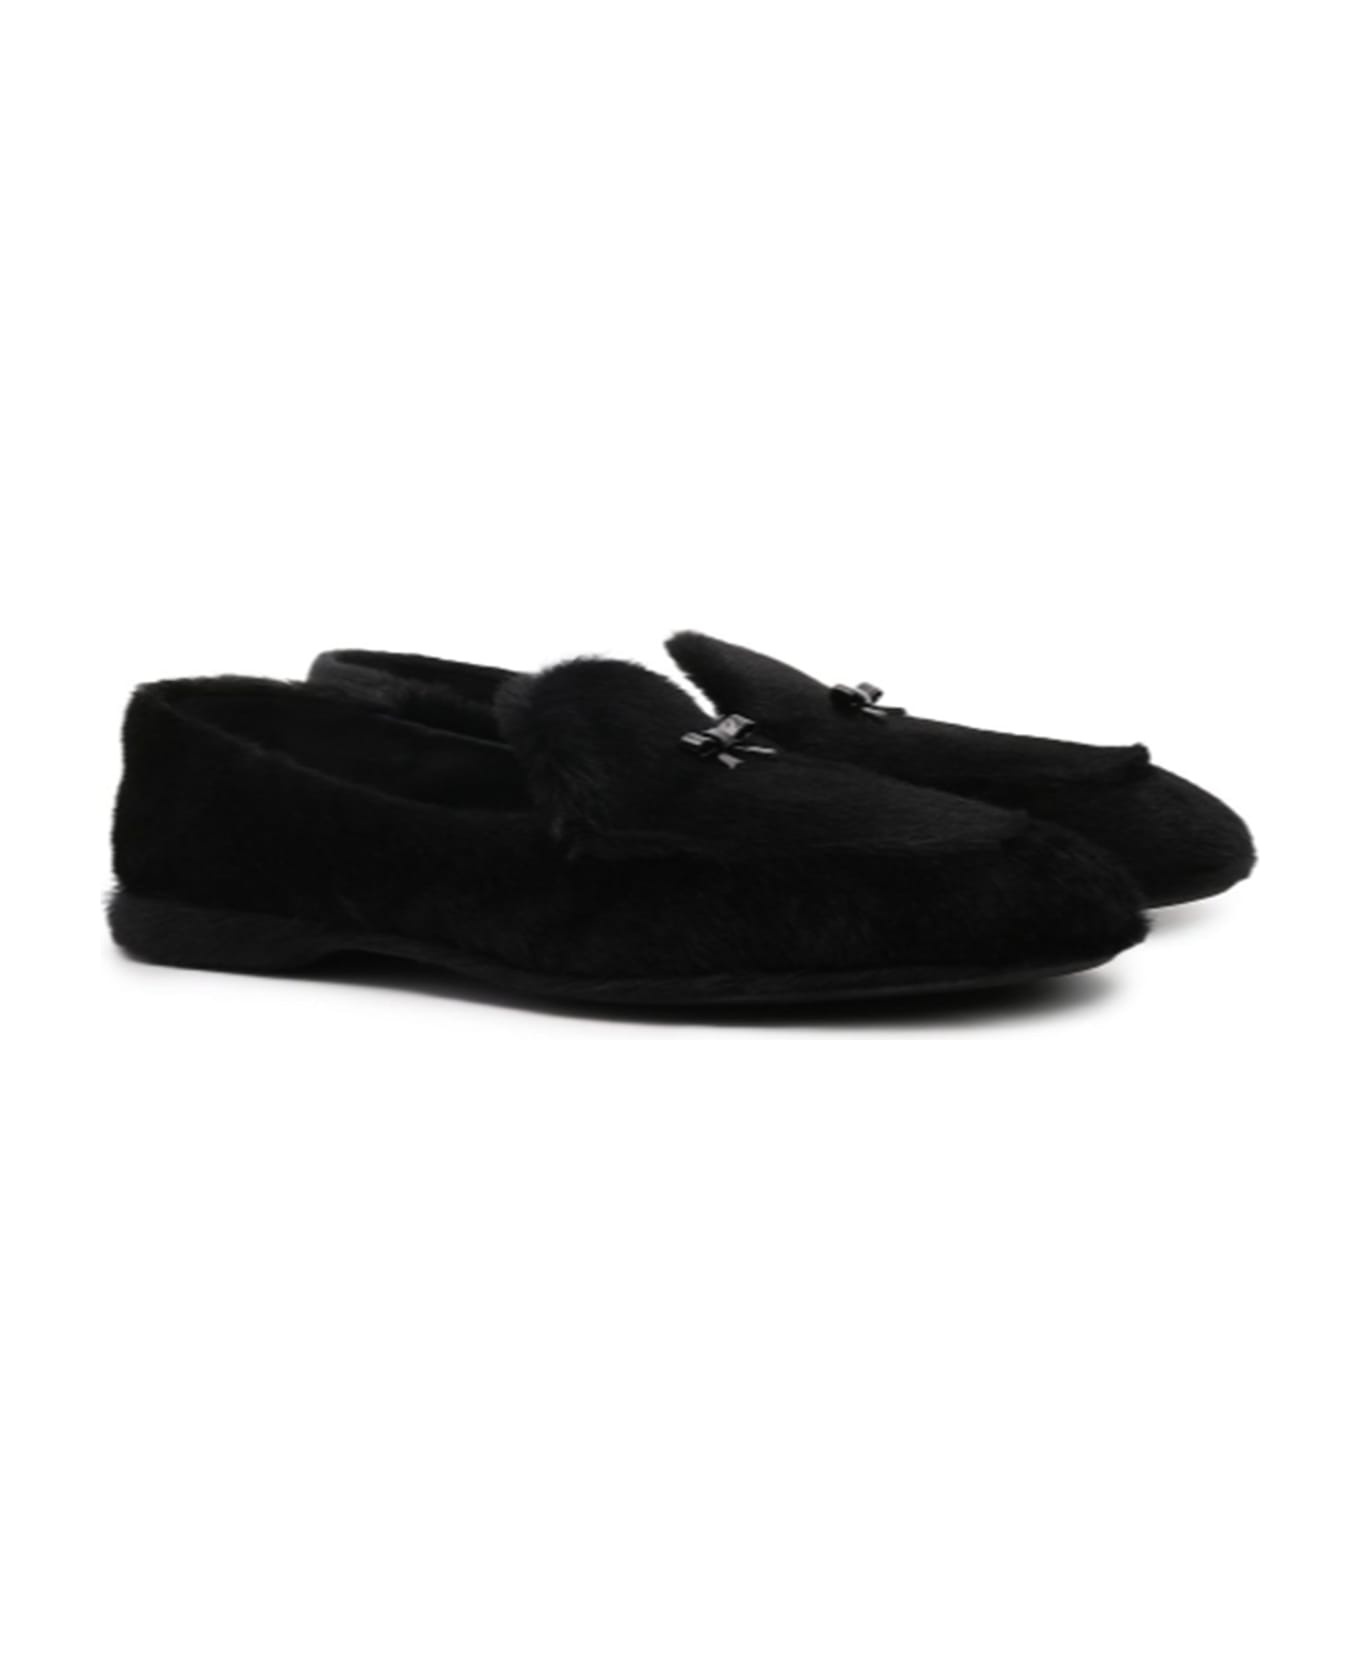 Fur Loafers - 2